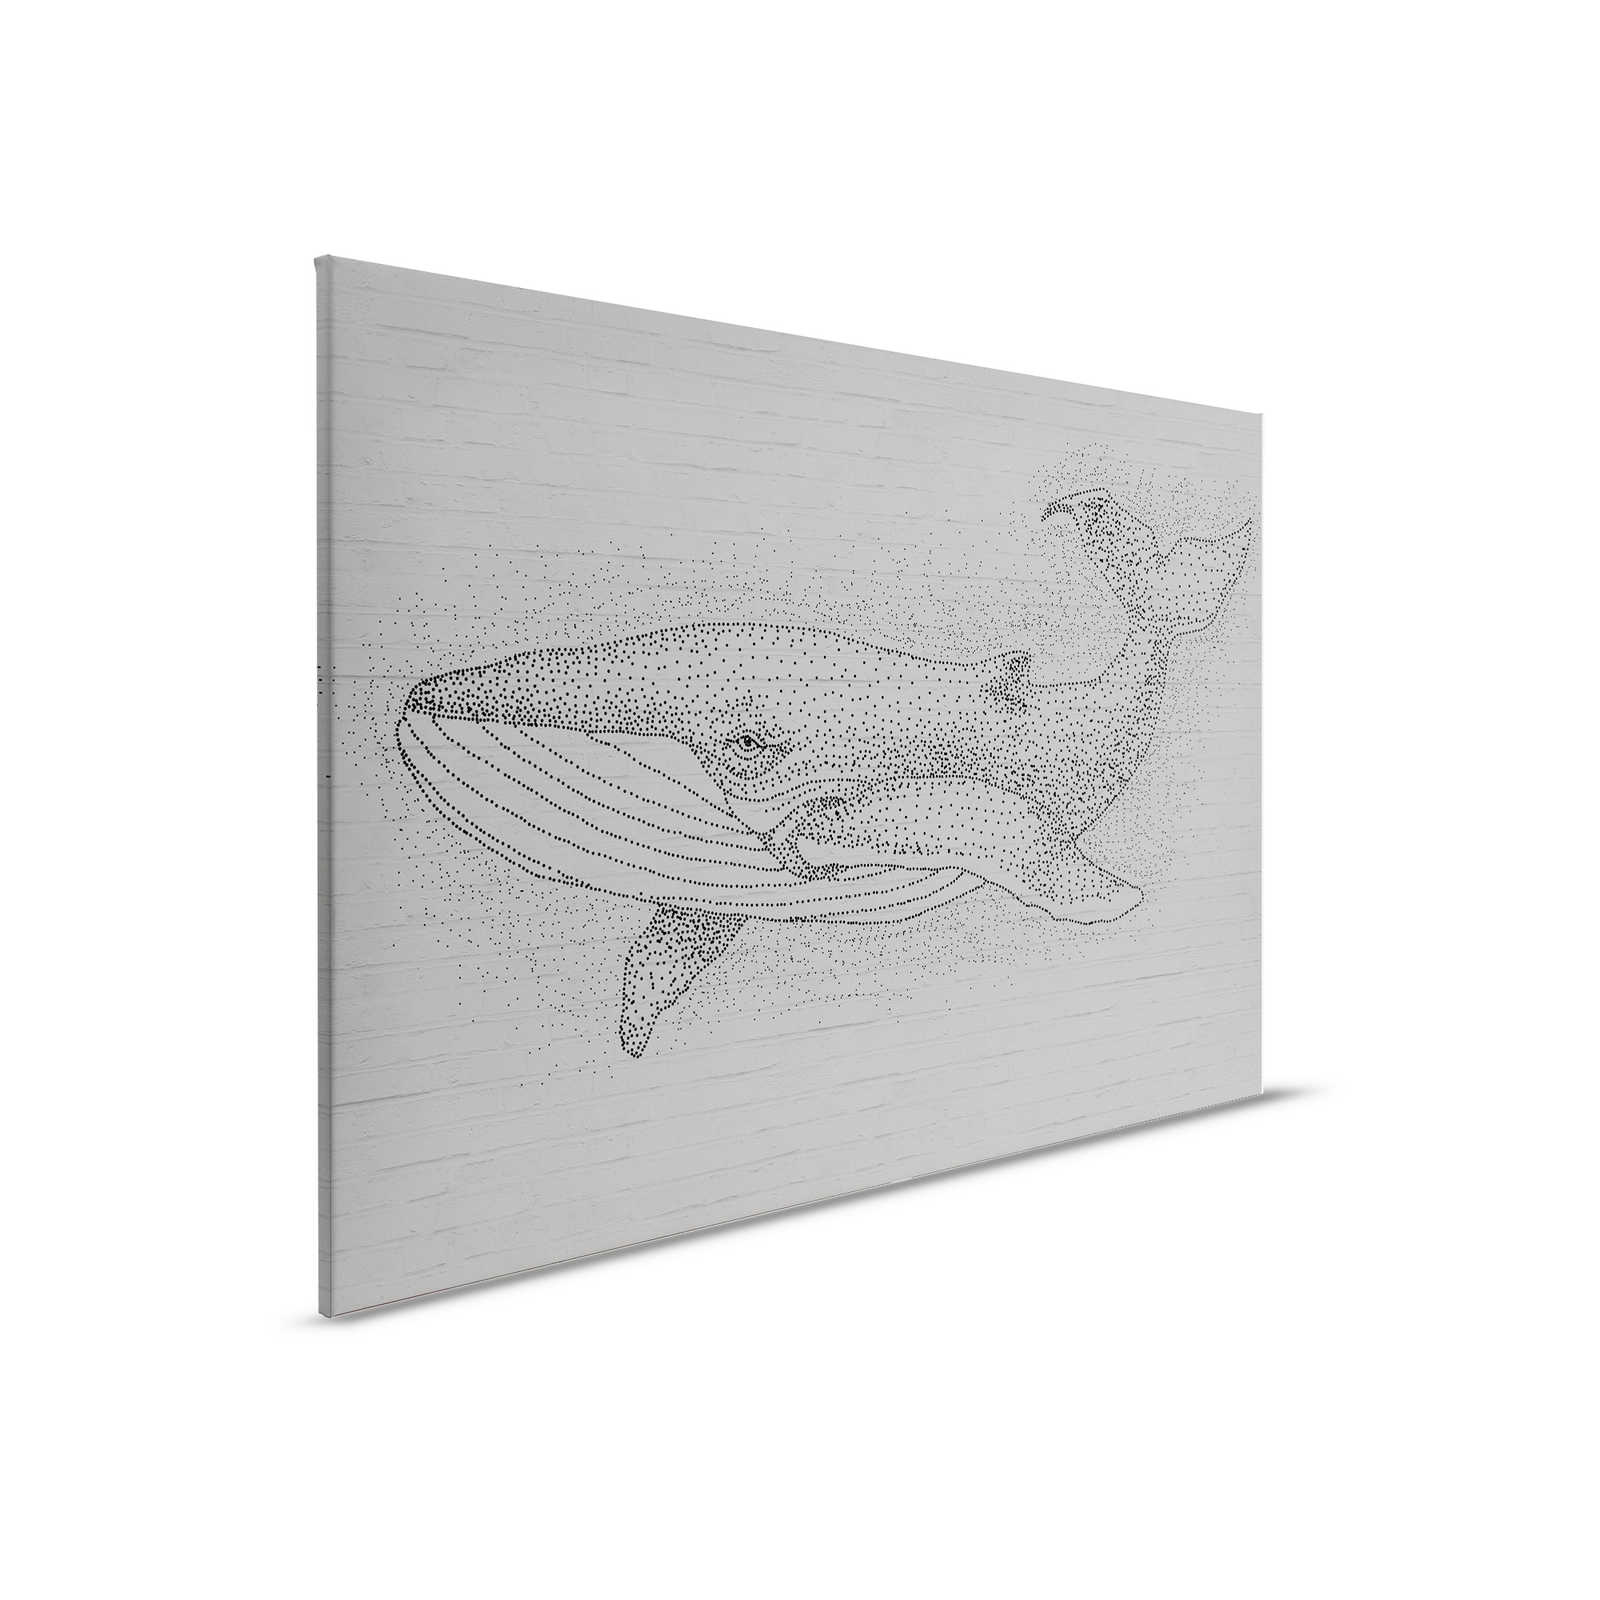 Canvas painting Whale in drawing style on 3D stone wall - 0,90 m x 0,60 m
